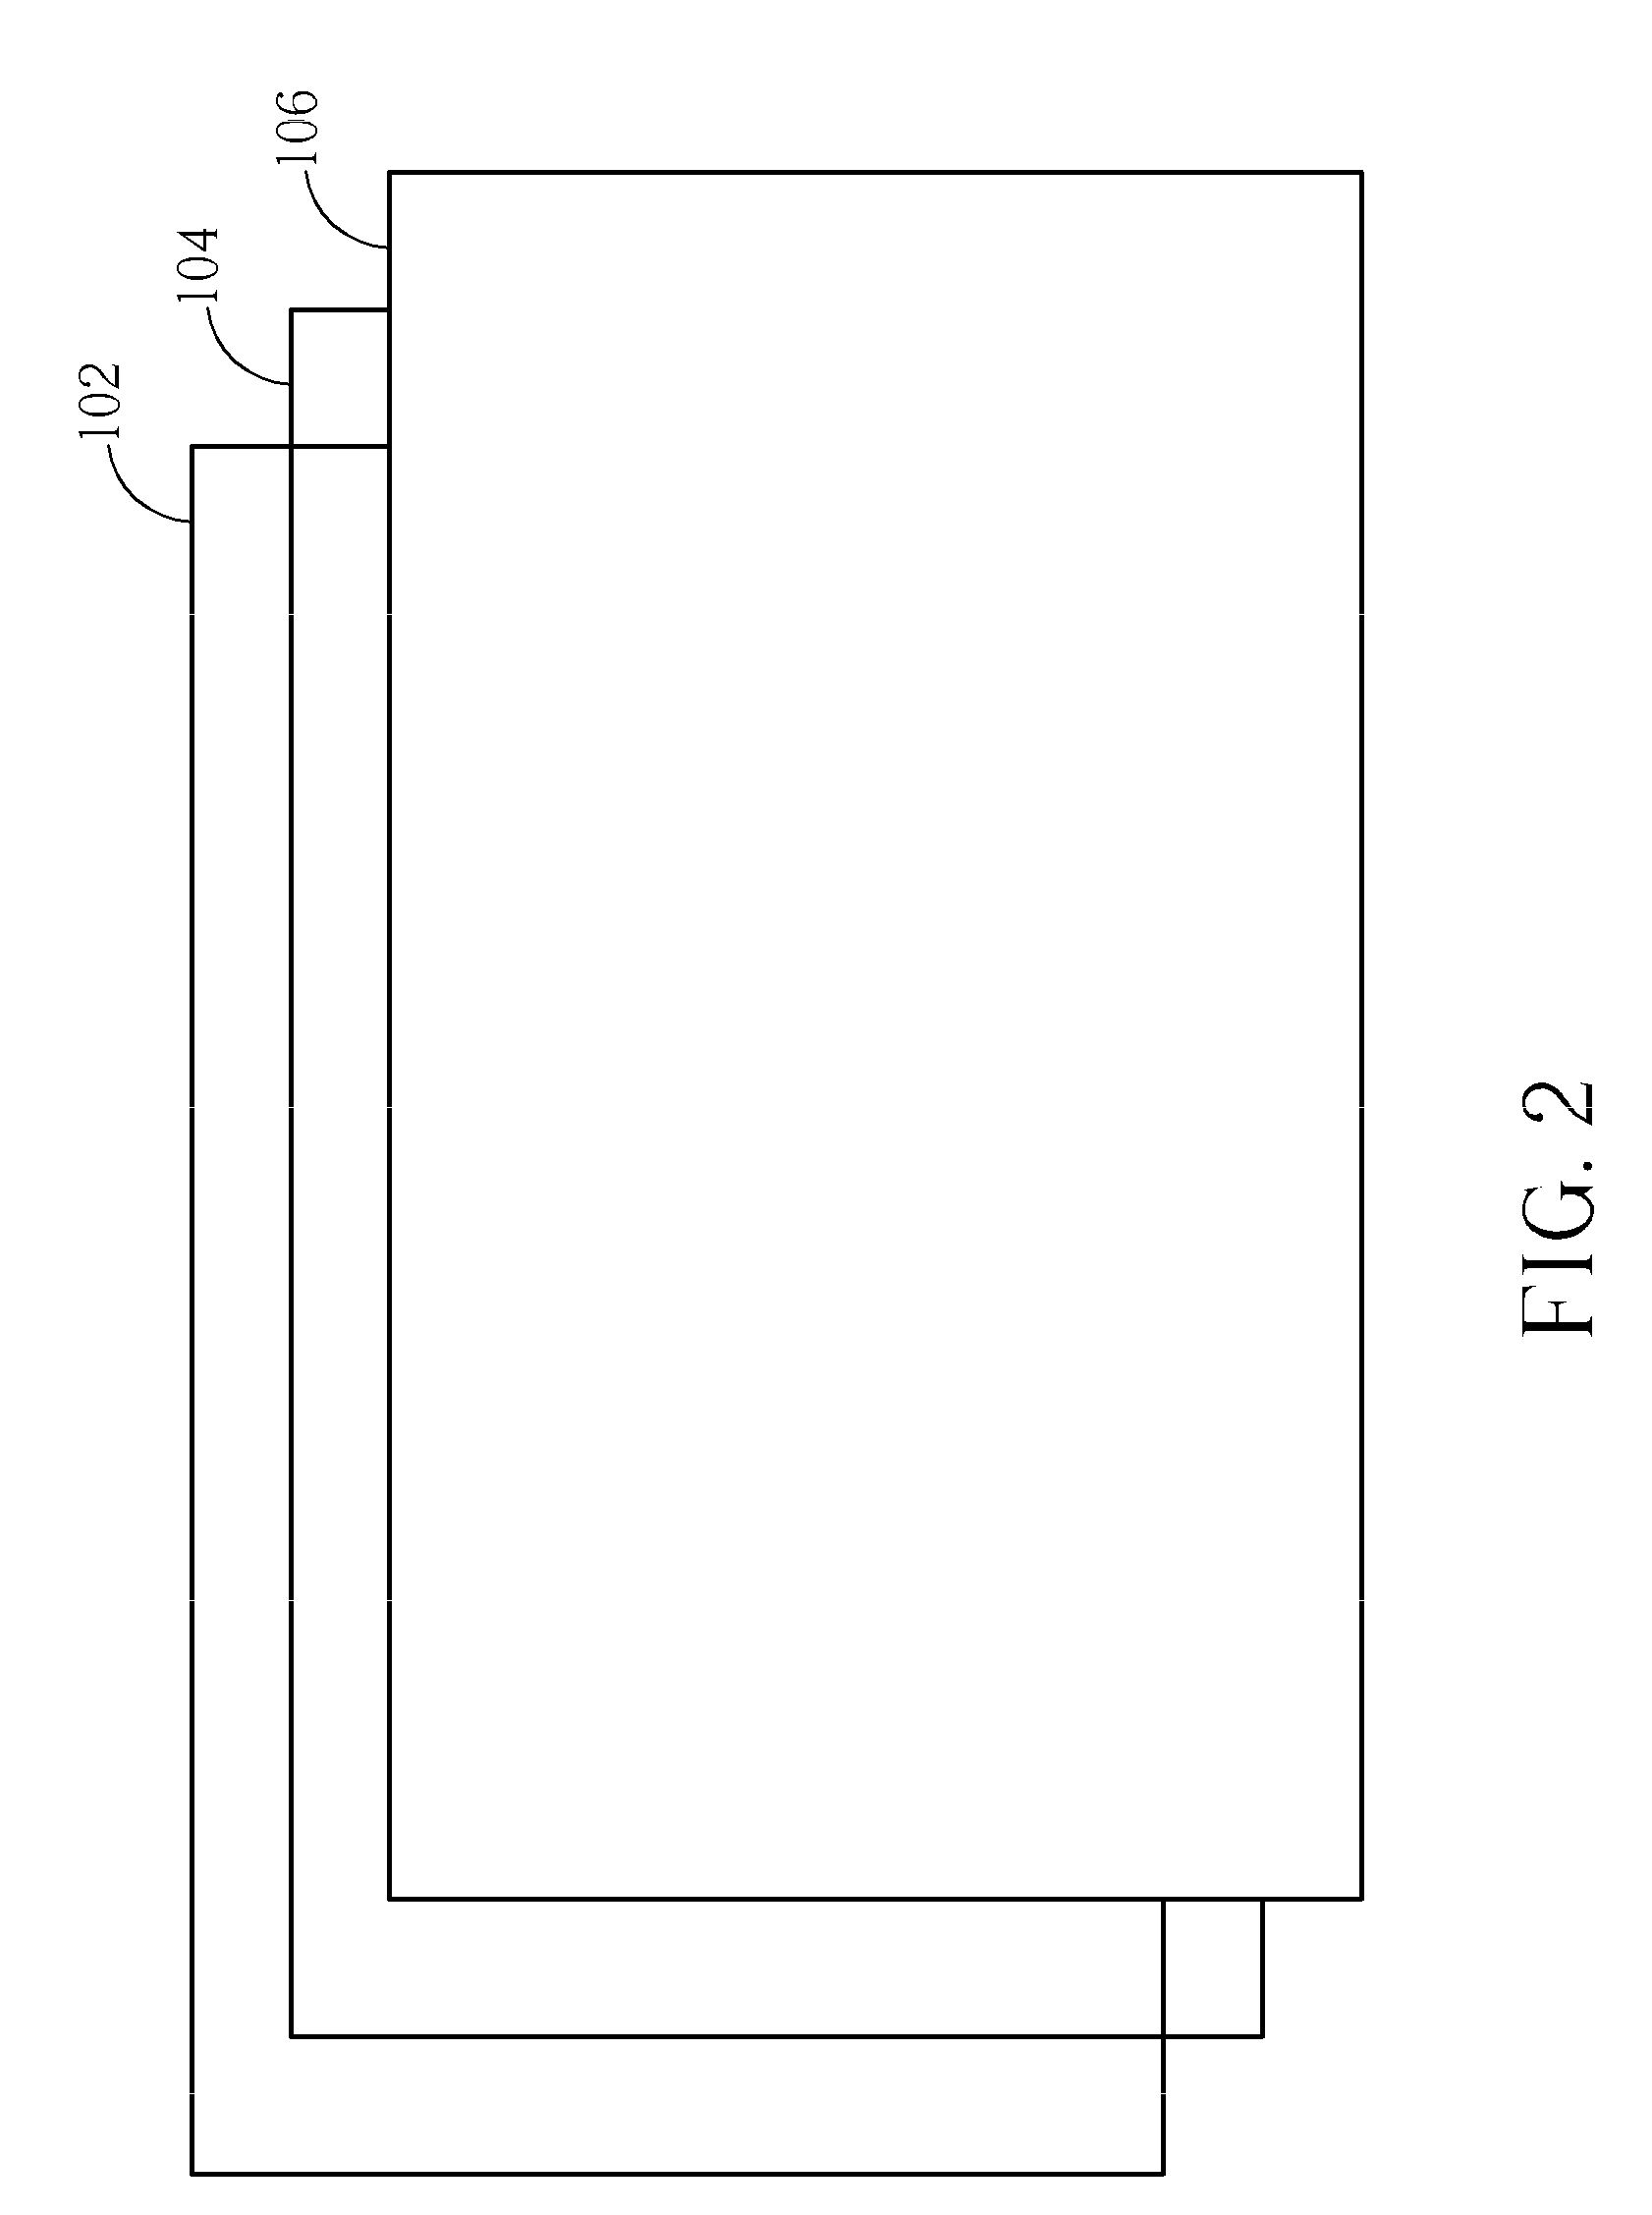 Method of forming a color filter touch sensing substrate